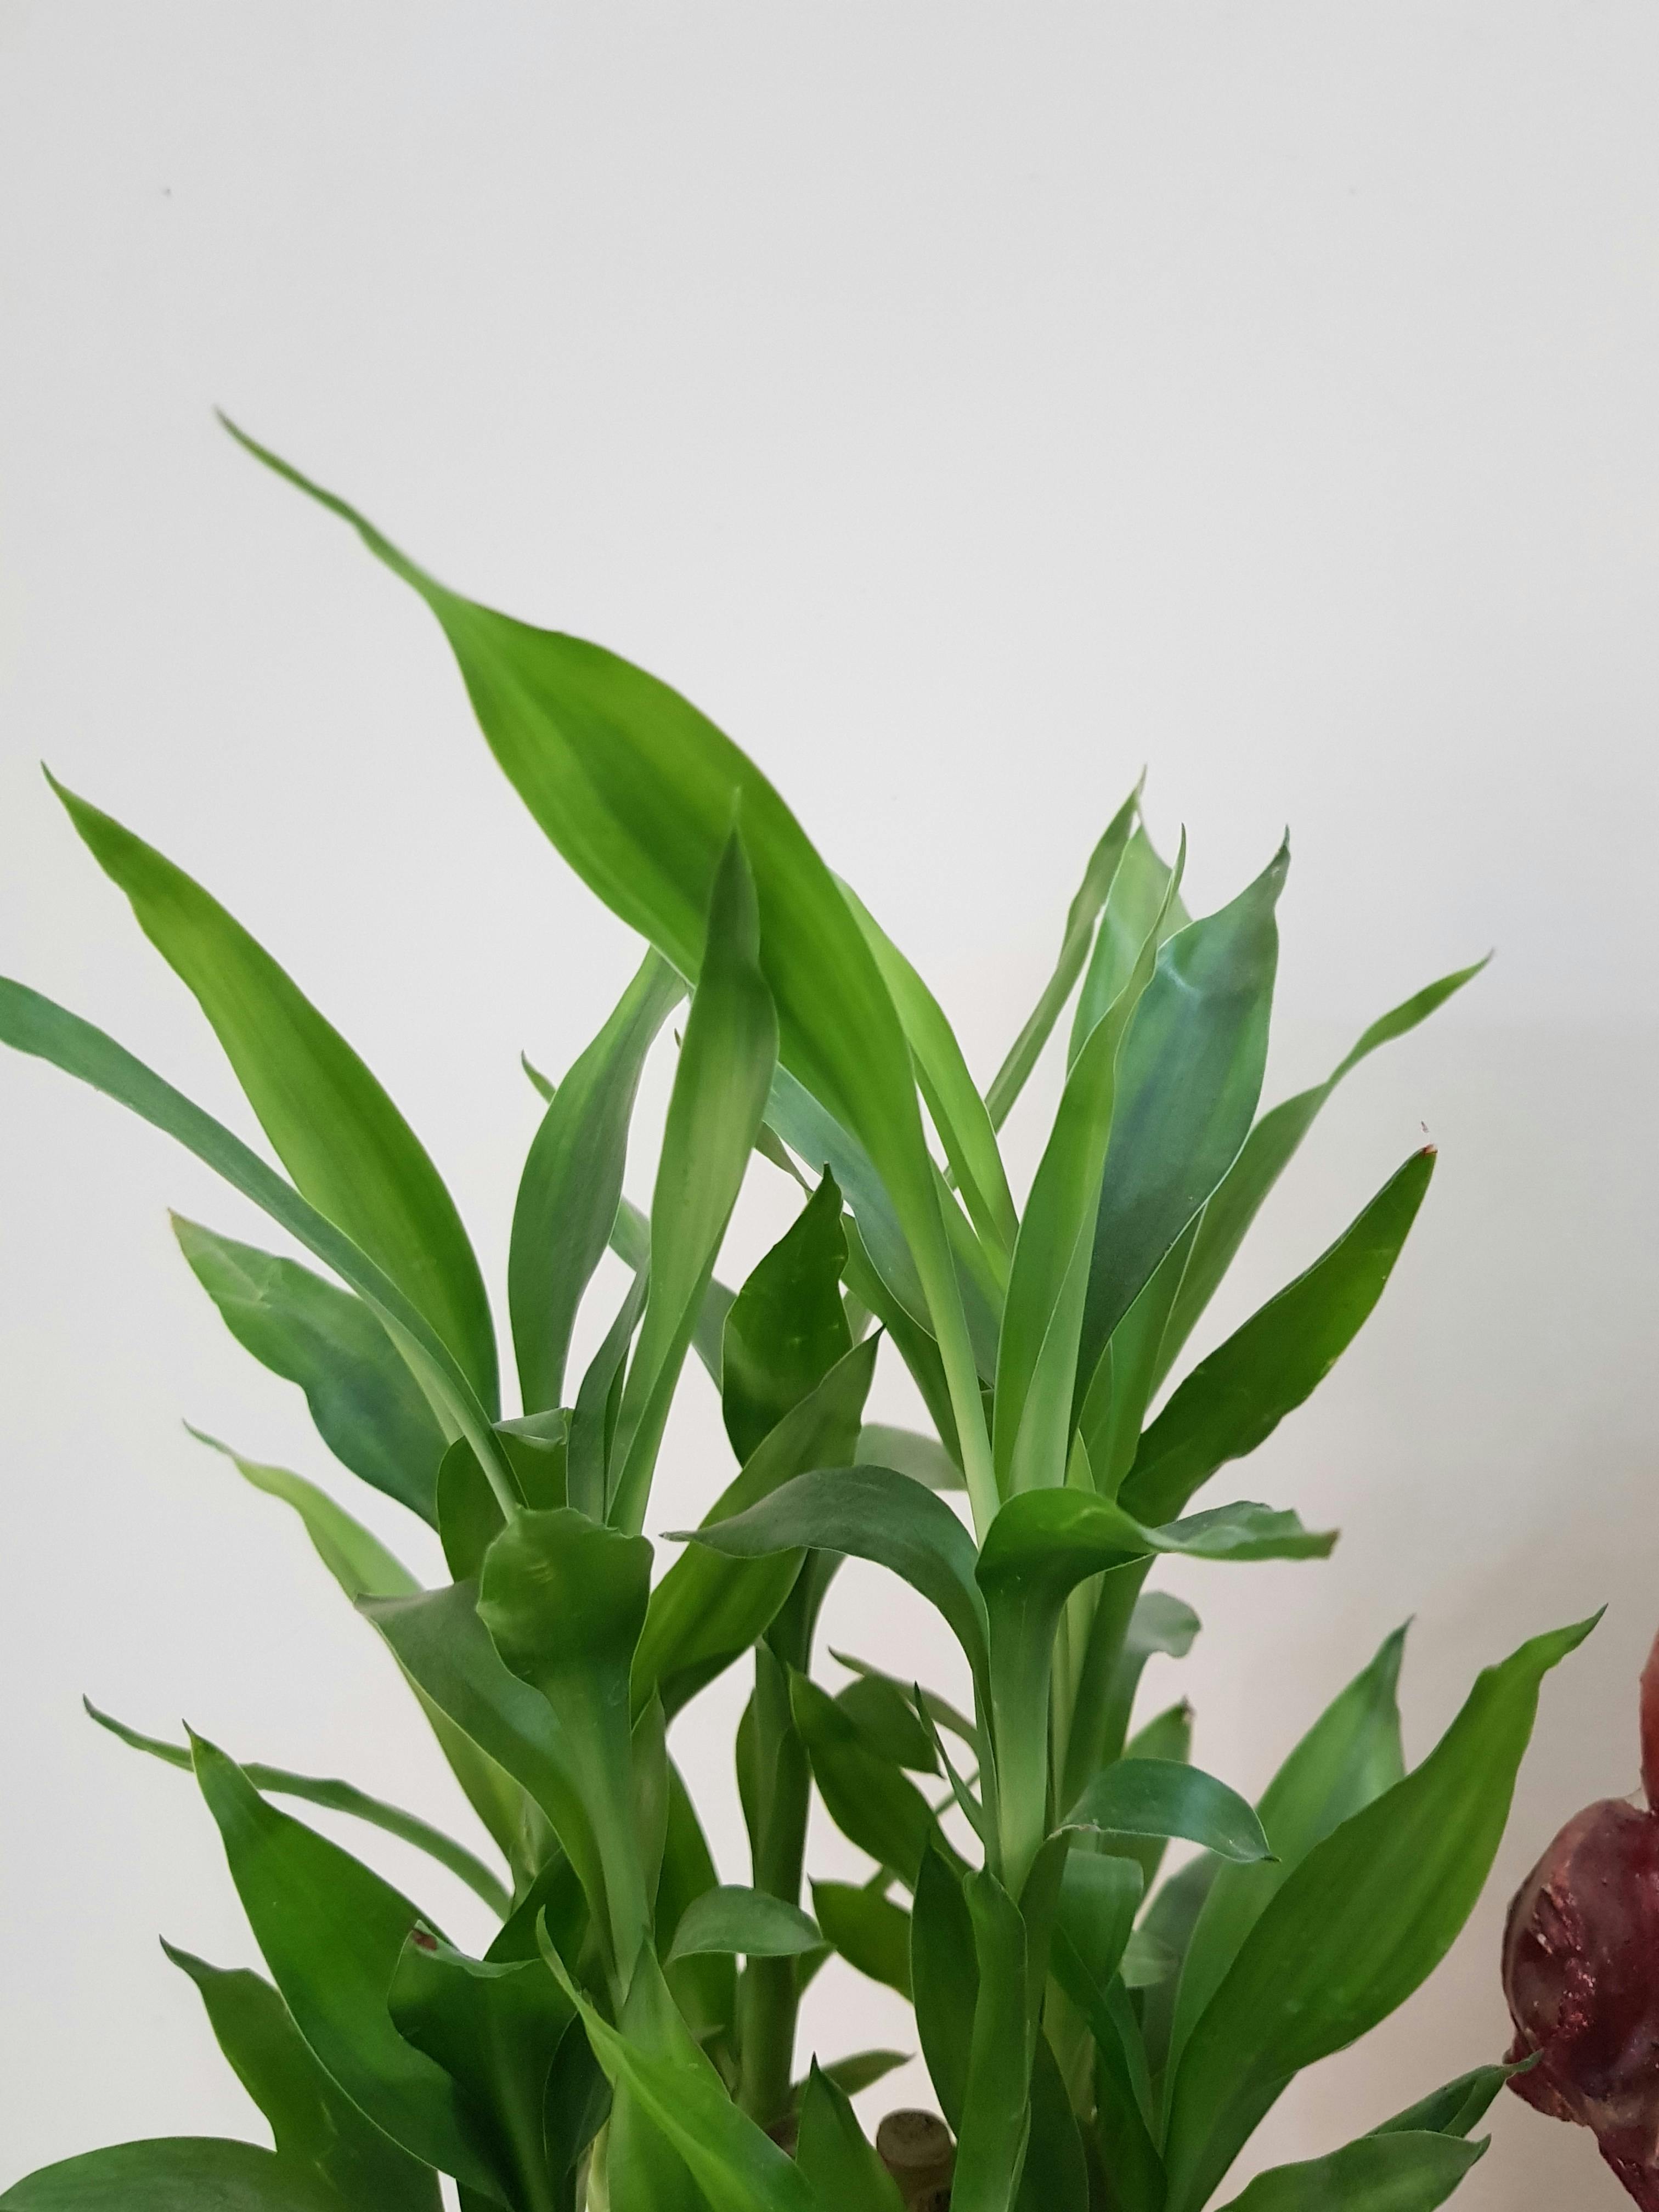 Free stock photo of Elif Green plant indoor